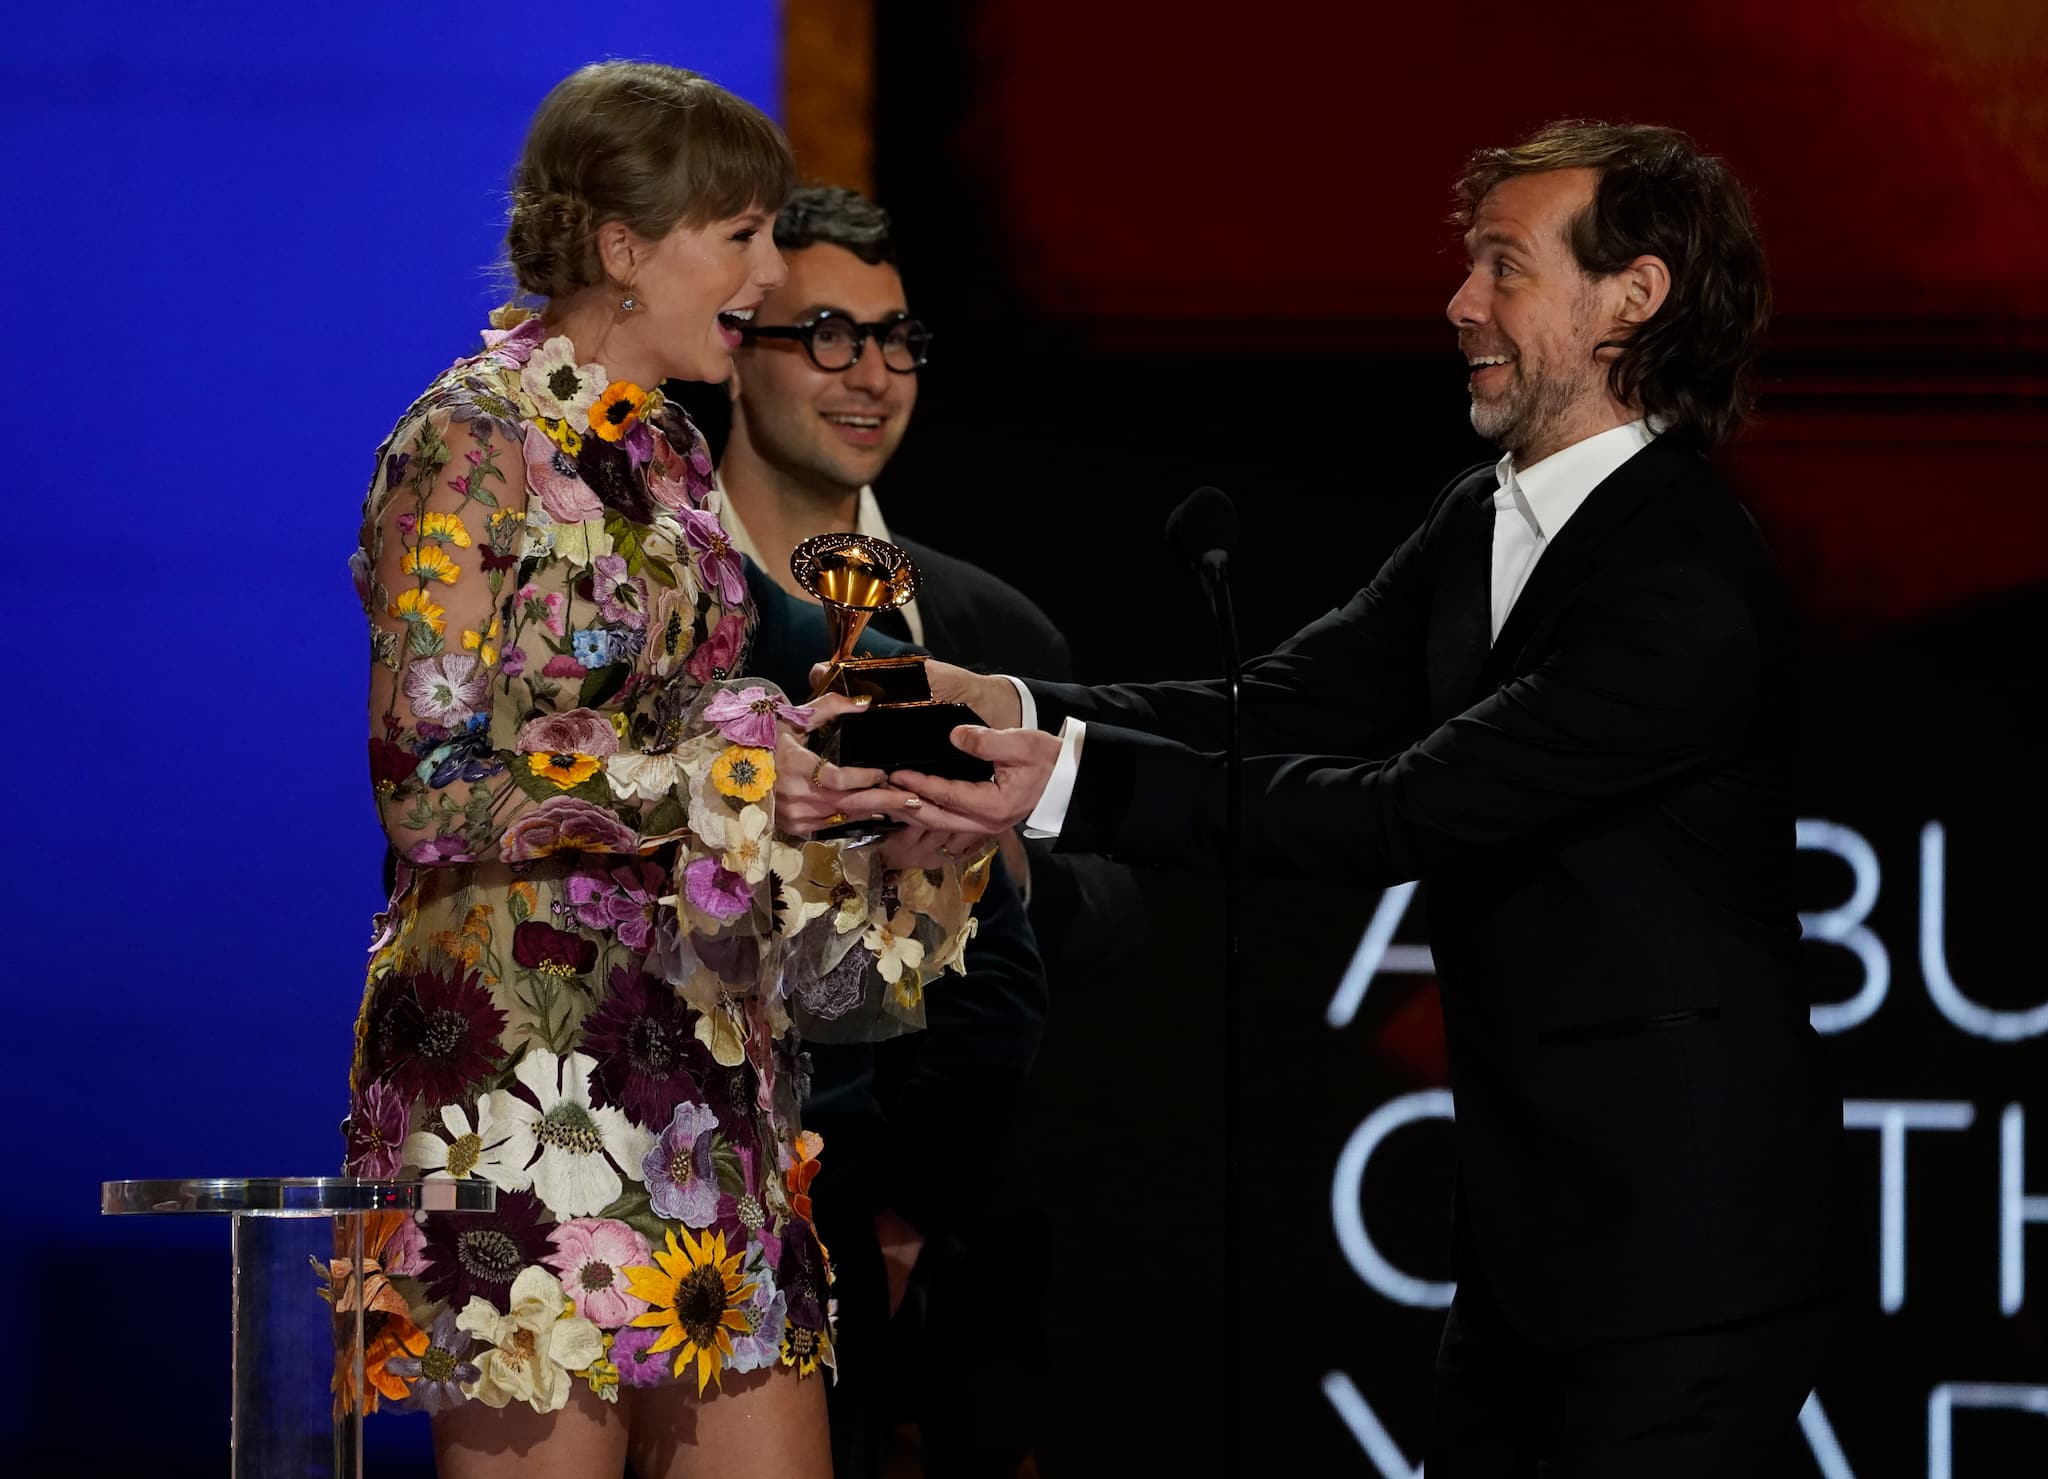 Taylor Swift, from left, Jack Antonoff and Aaron Dessner accept the award for album of the year for "Folklore"at the 63rd annual Grammy Awards at the Los Angeles Convention Center on Sunday, March 14, 2021. (AP Photo/Chris Pizzello)